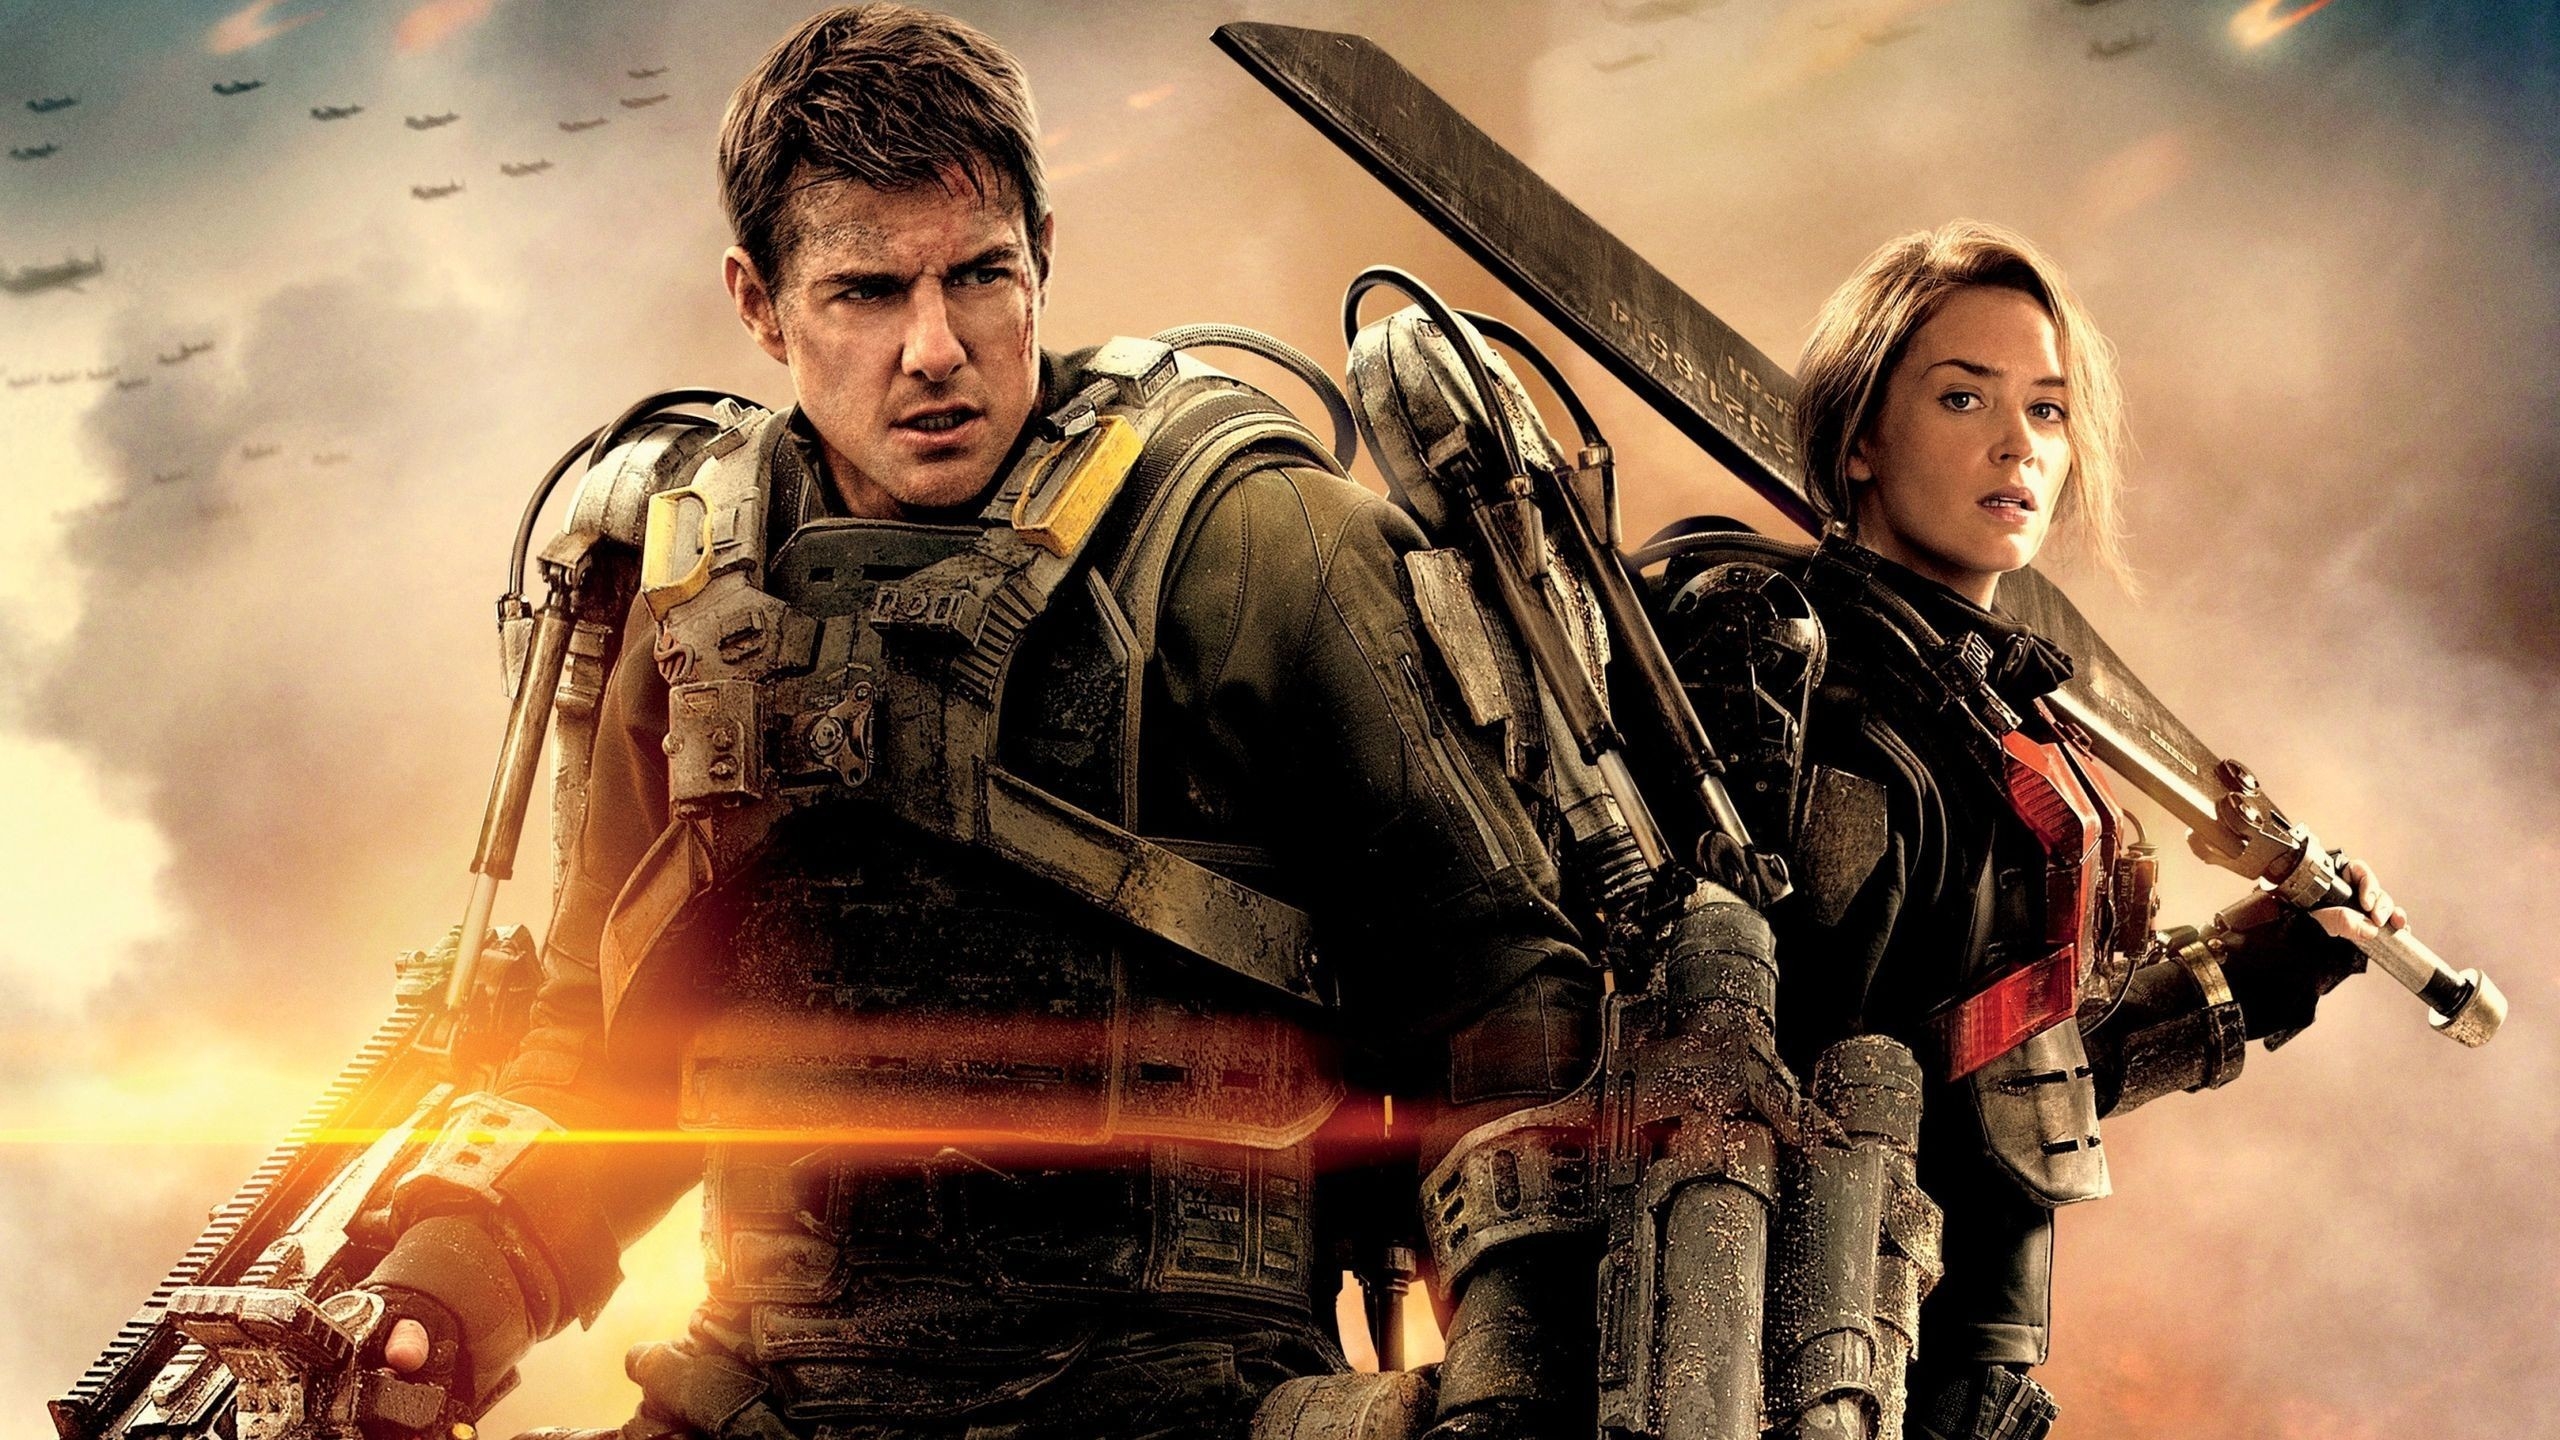 2014 Edge of Tomorrow for 2560x1440 HDTV resolution